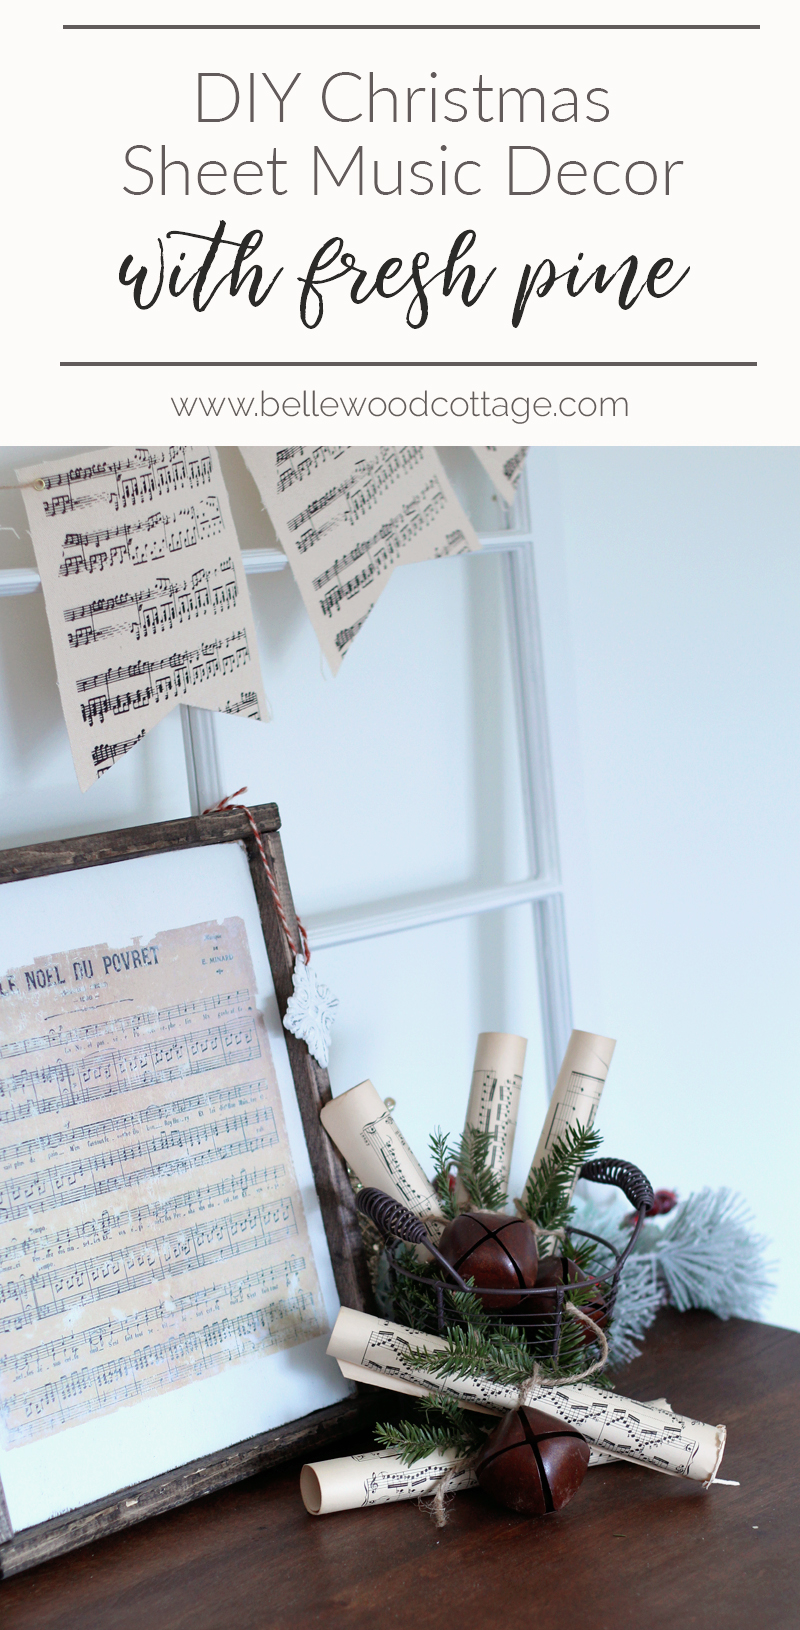 Get inspired to create pretty DIY Christmas decorations with this easy idea for incorporating sheet music decor and fresh pine into your homemade Christmas!